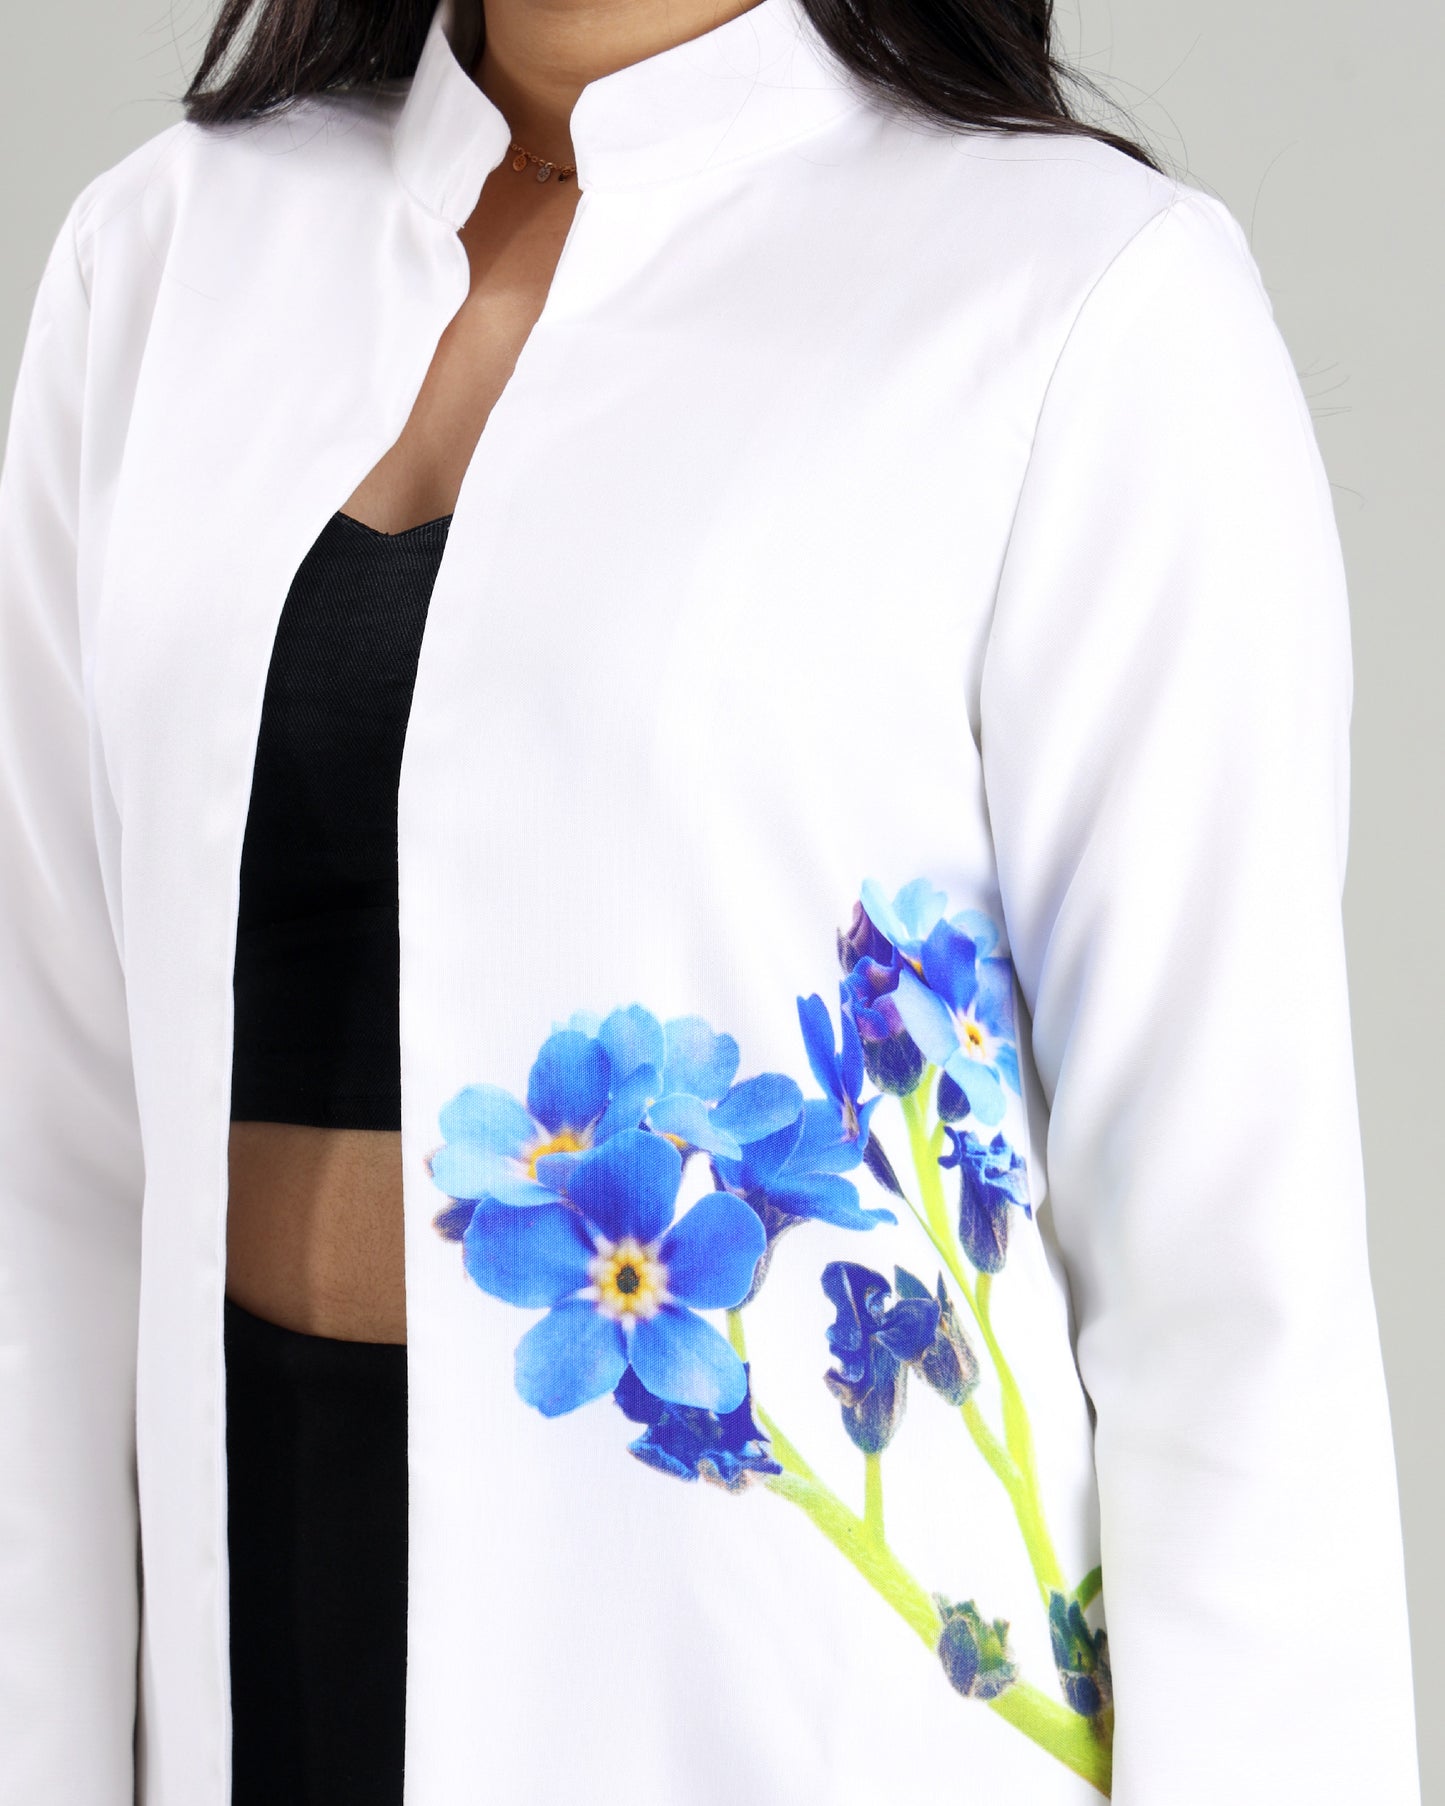 The Show-Stopping White Floral Jacket